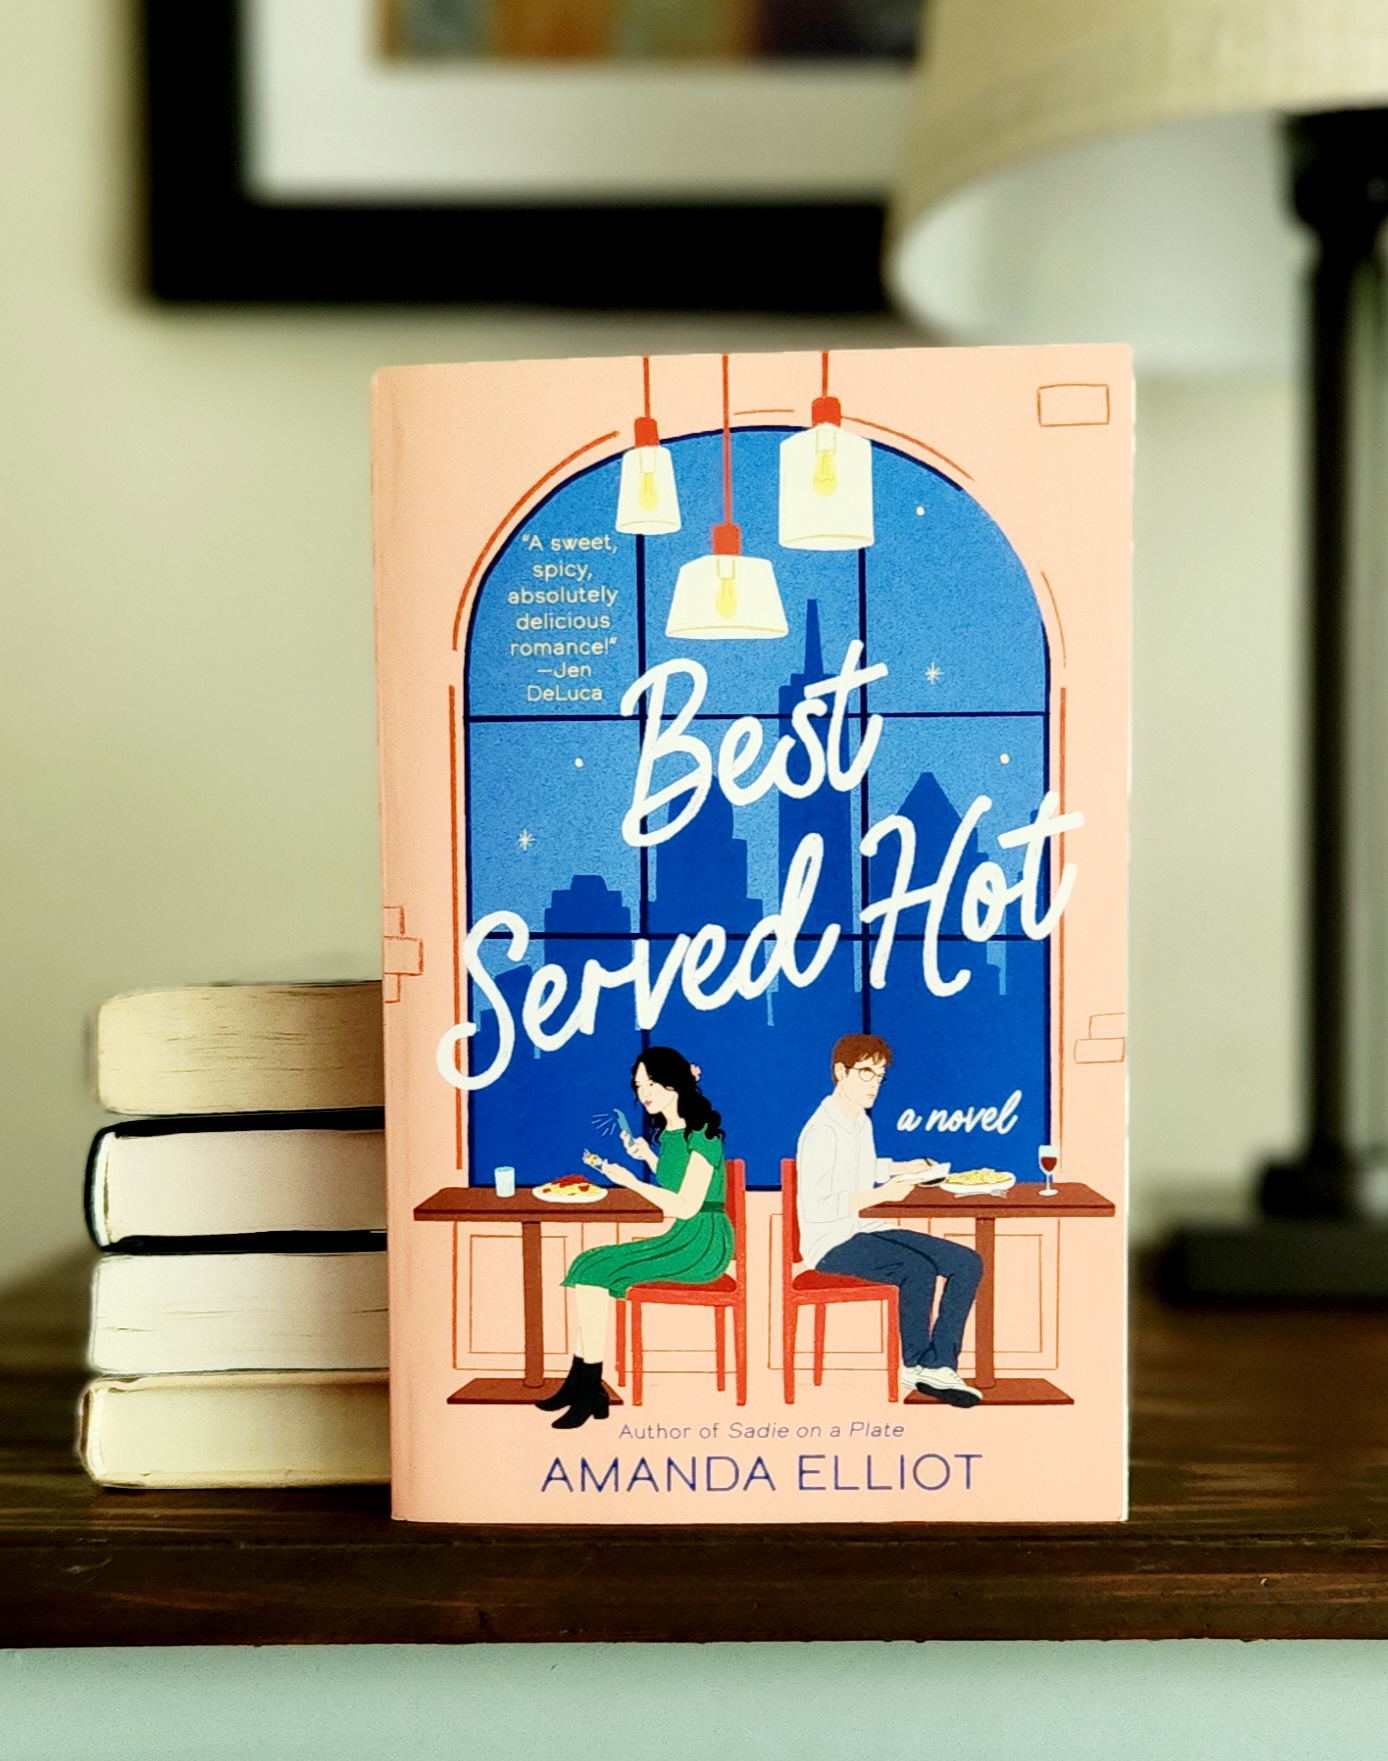 Book Review of BEST SERVED HOT